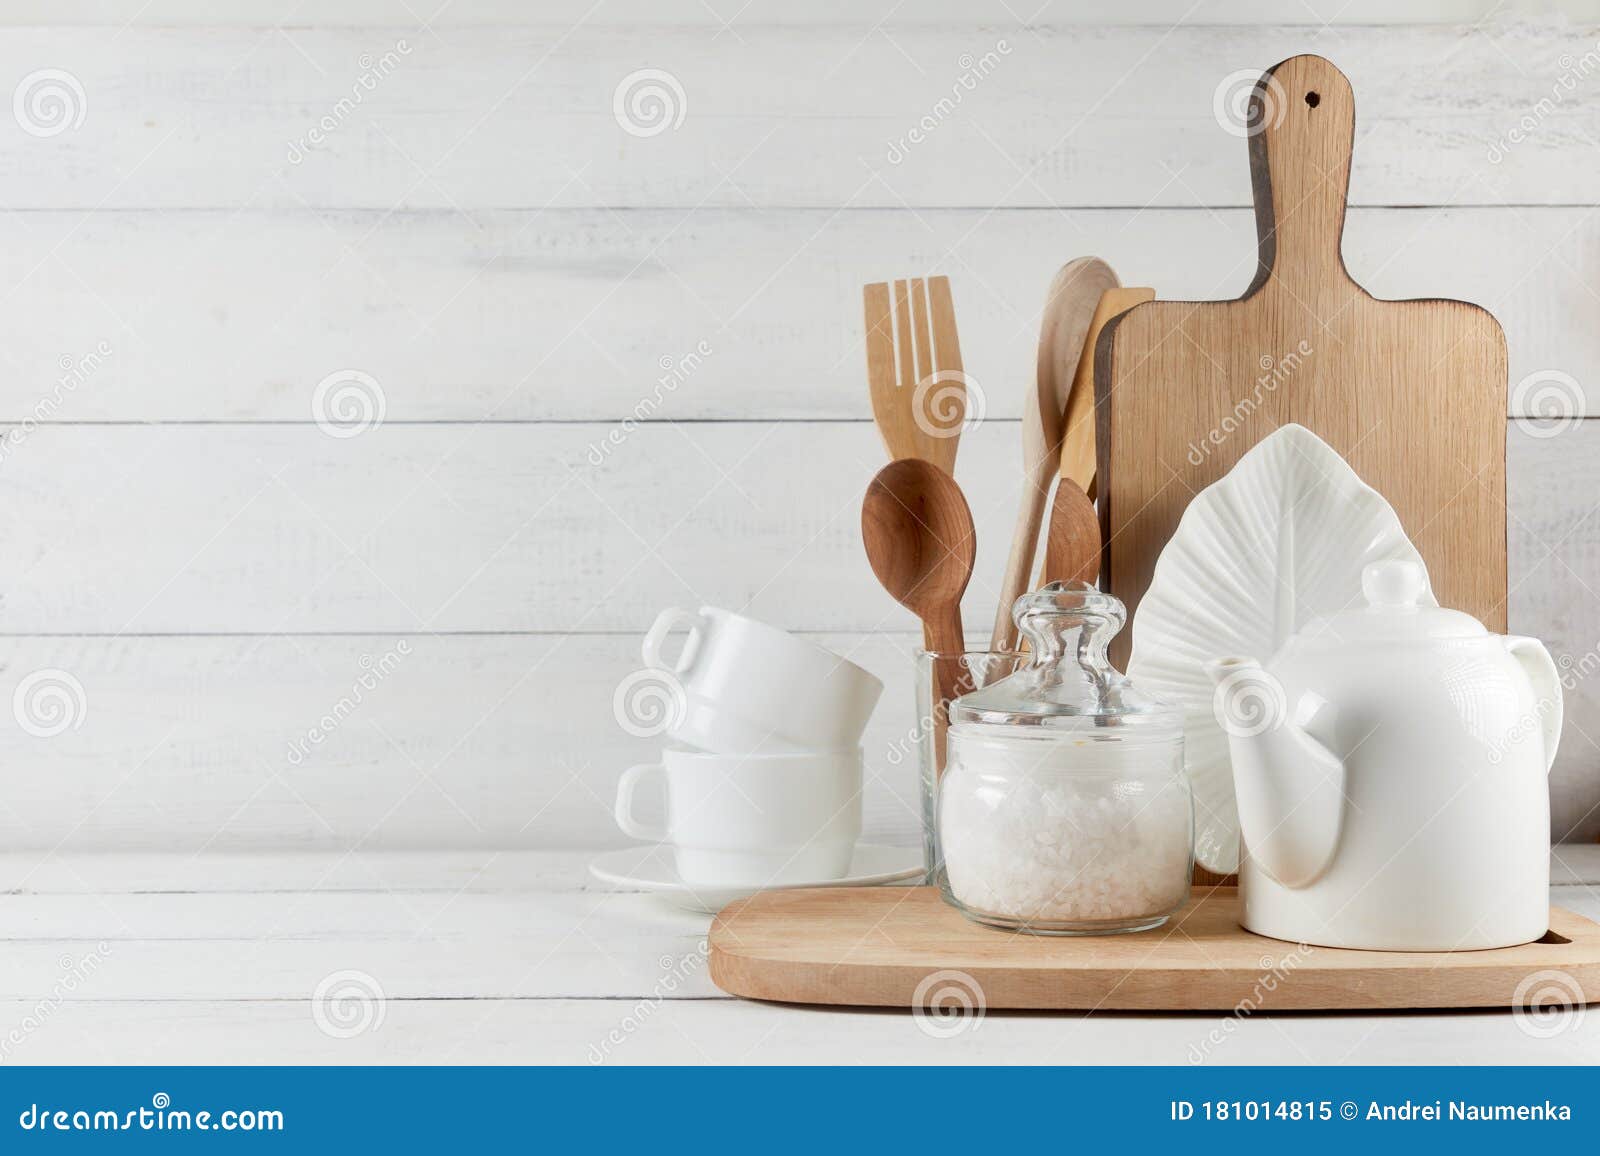 Download Kitchen Wide Banner Concept Kitchen Background For Mockup With Spoon Teapot Cups Bowls Flowers On Wooden Table Stock Image Image Of Concept Interior 181014815